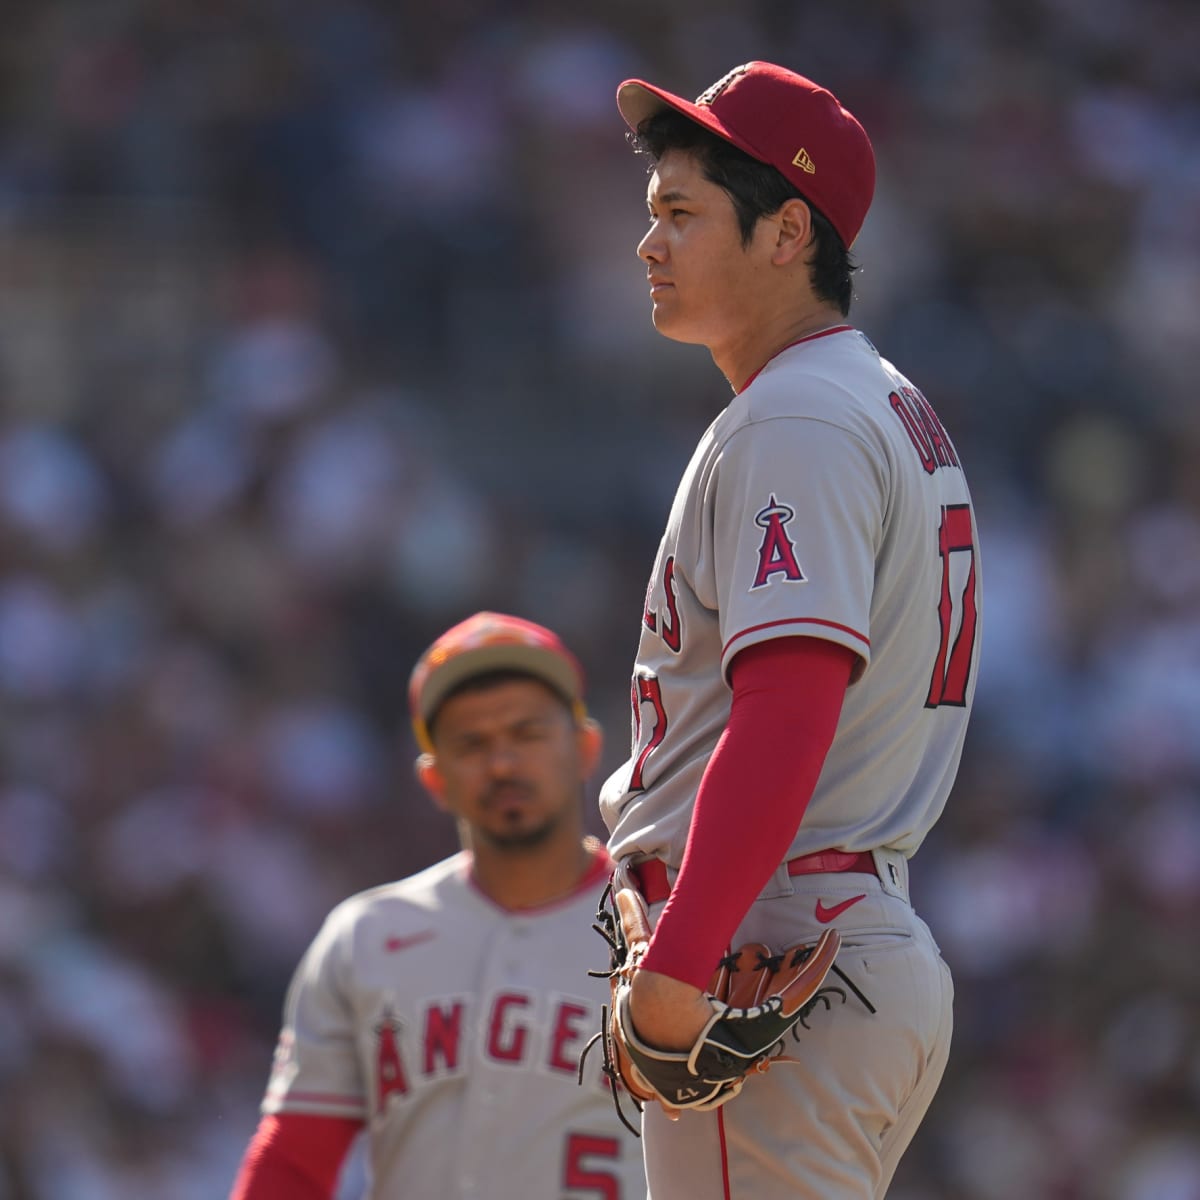 Shohei Ohtani of the Los Angeles Angels walks to the dressing room